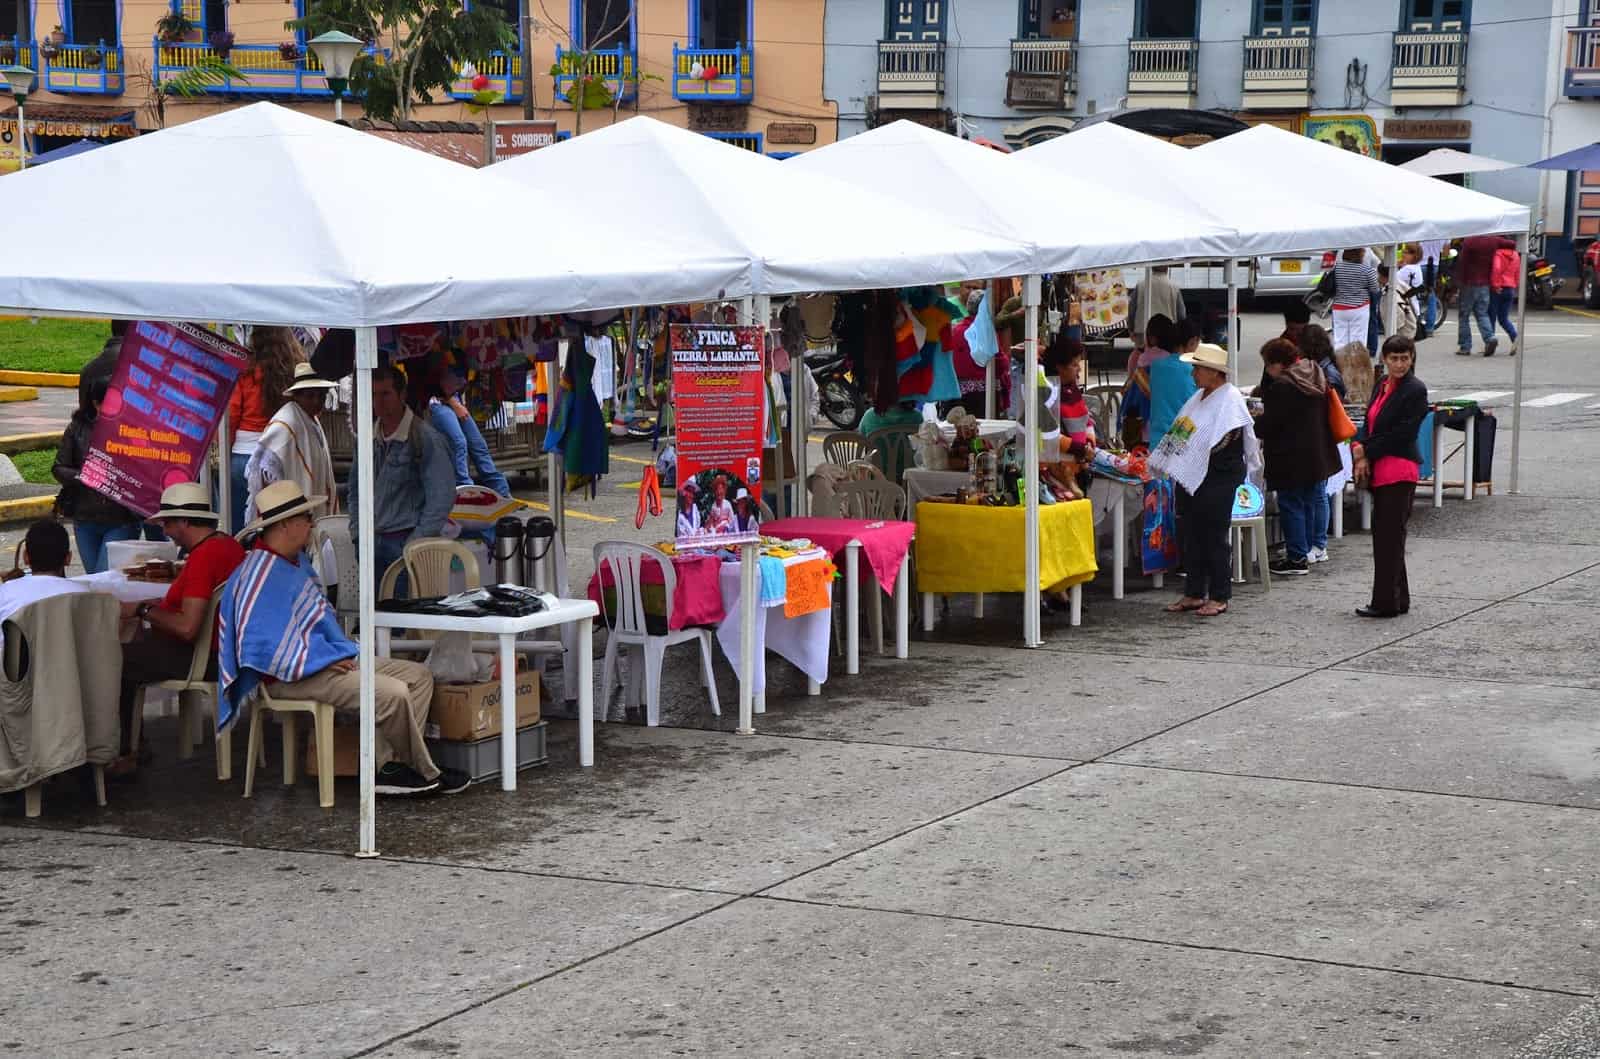 Tents on the plaza in September 2014 in Filandia, Quindío, Colombia